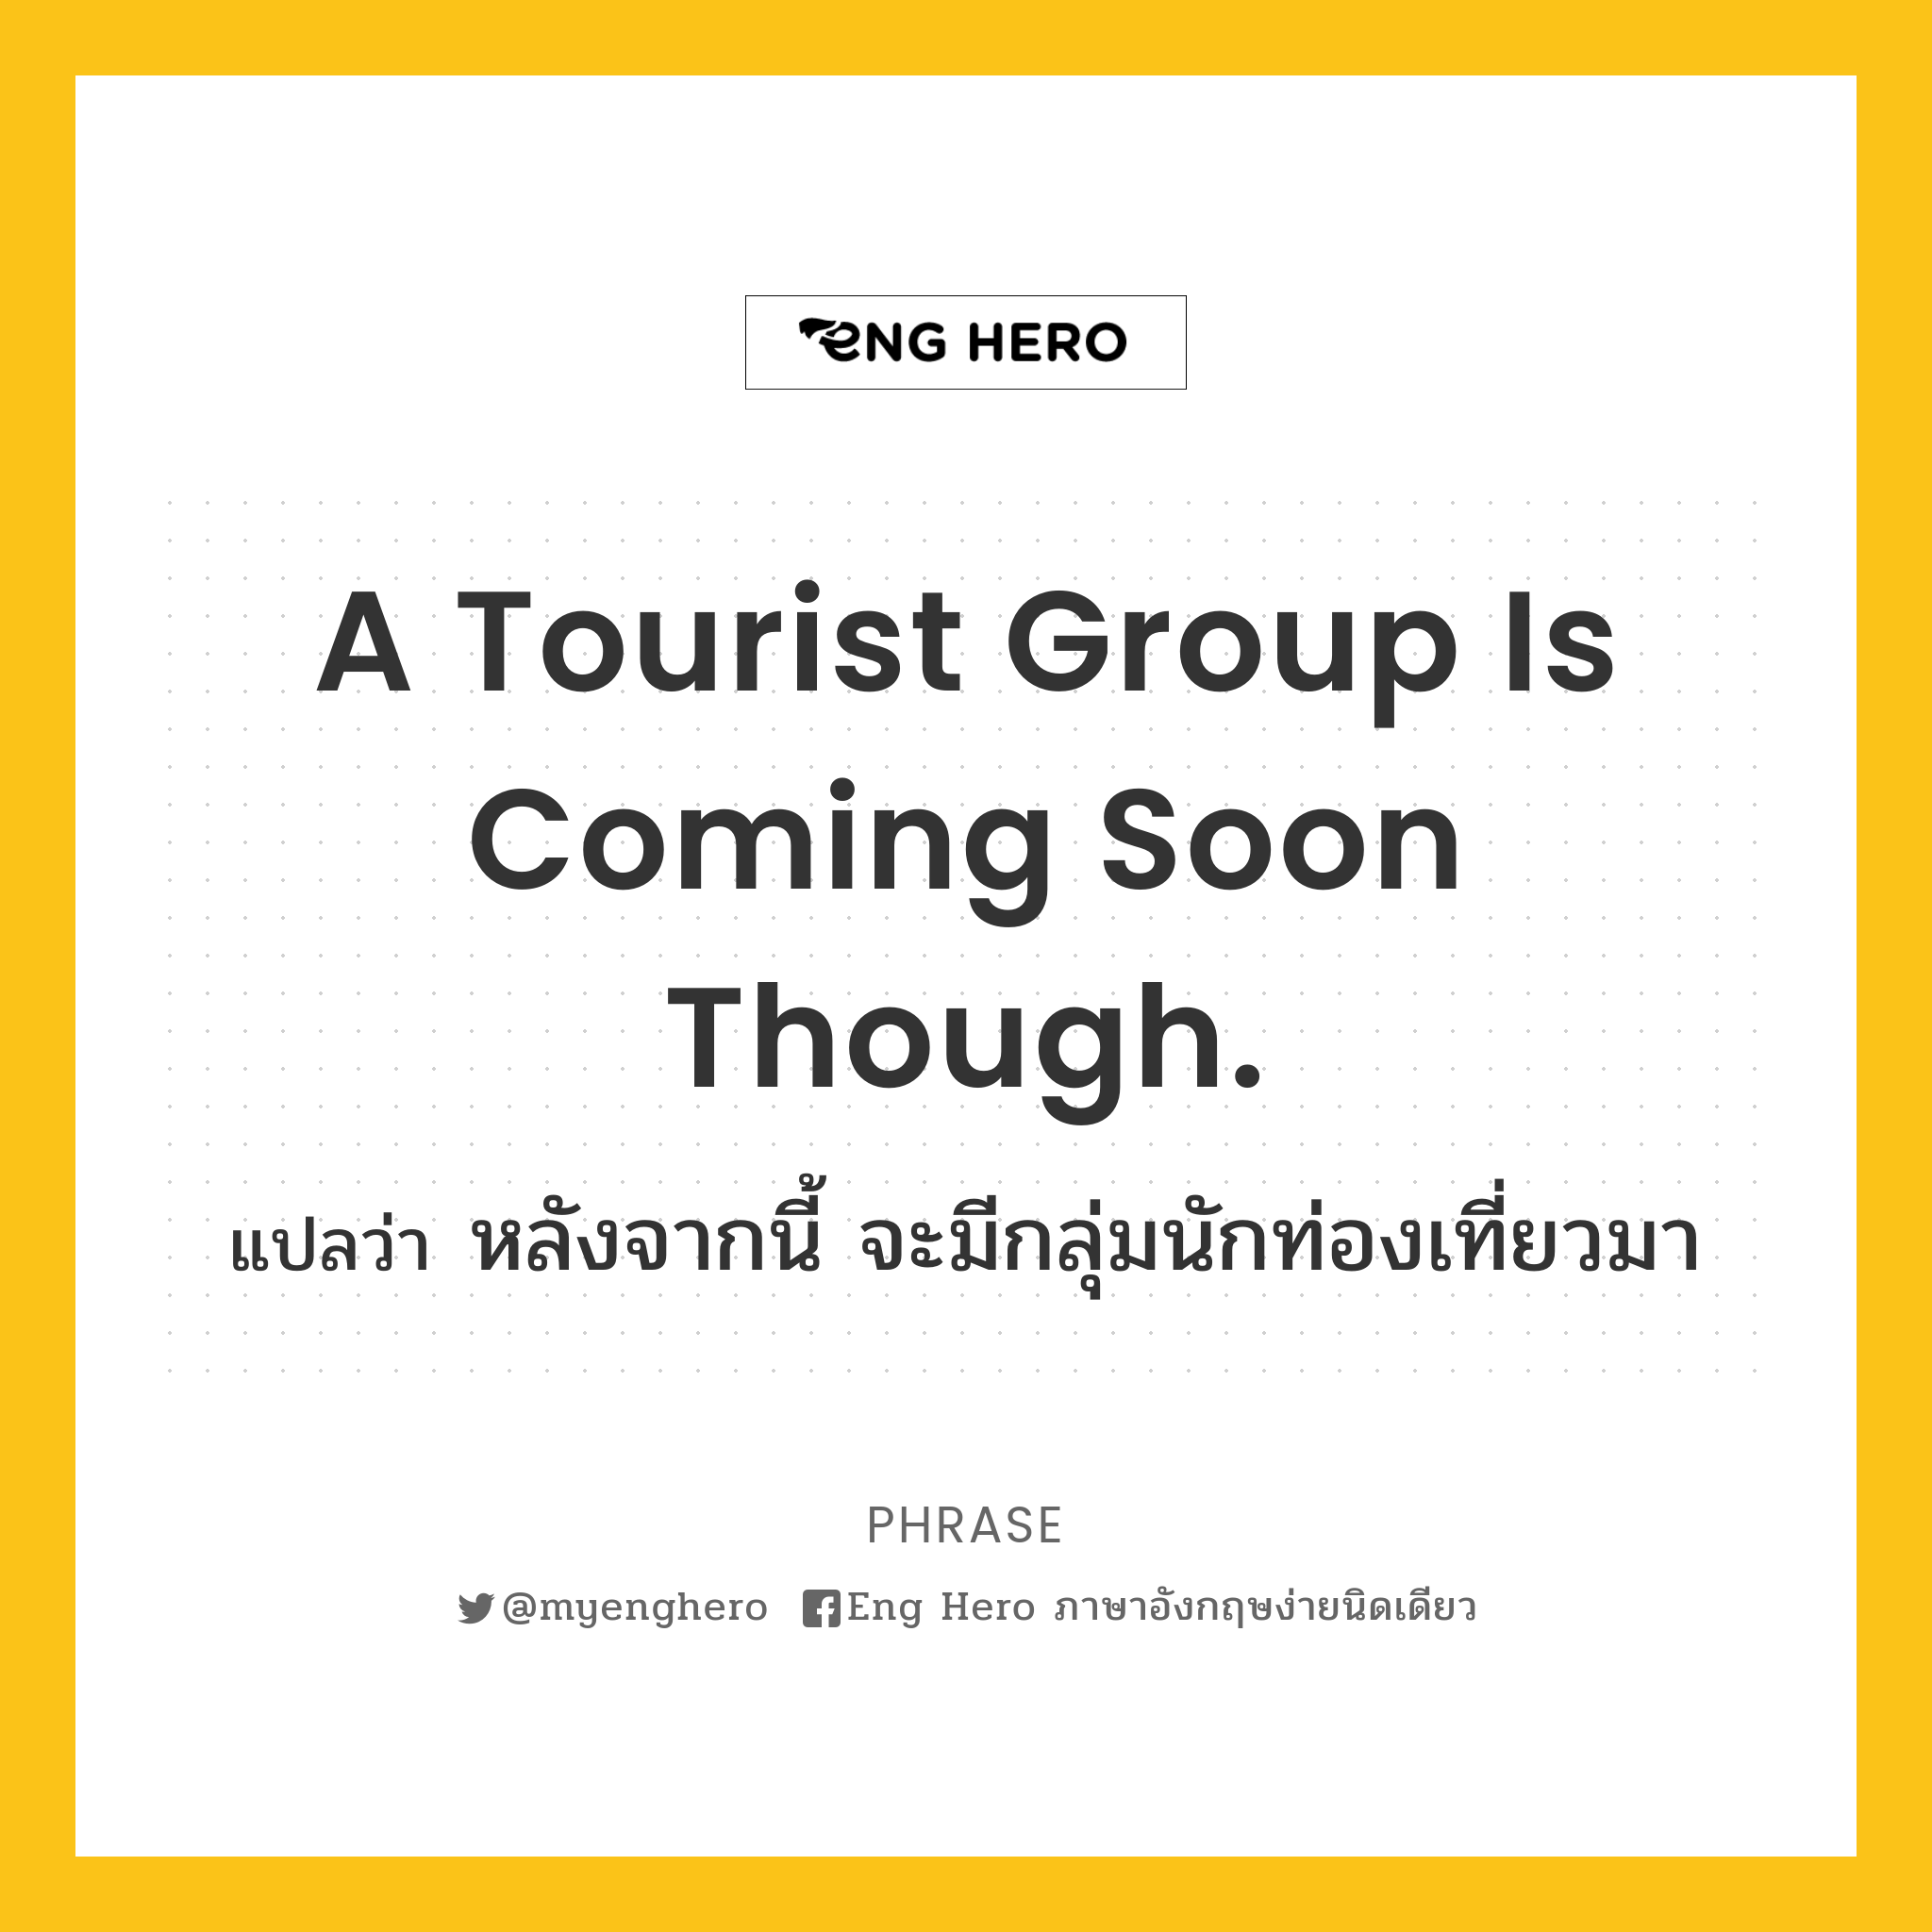 A tourist group is coming soon though.